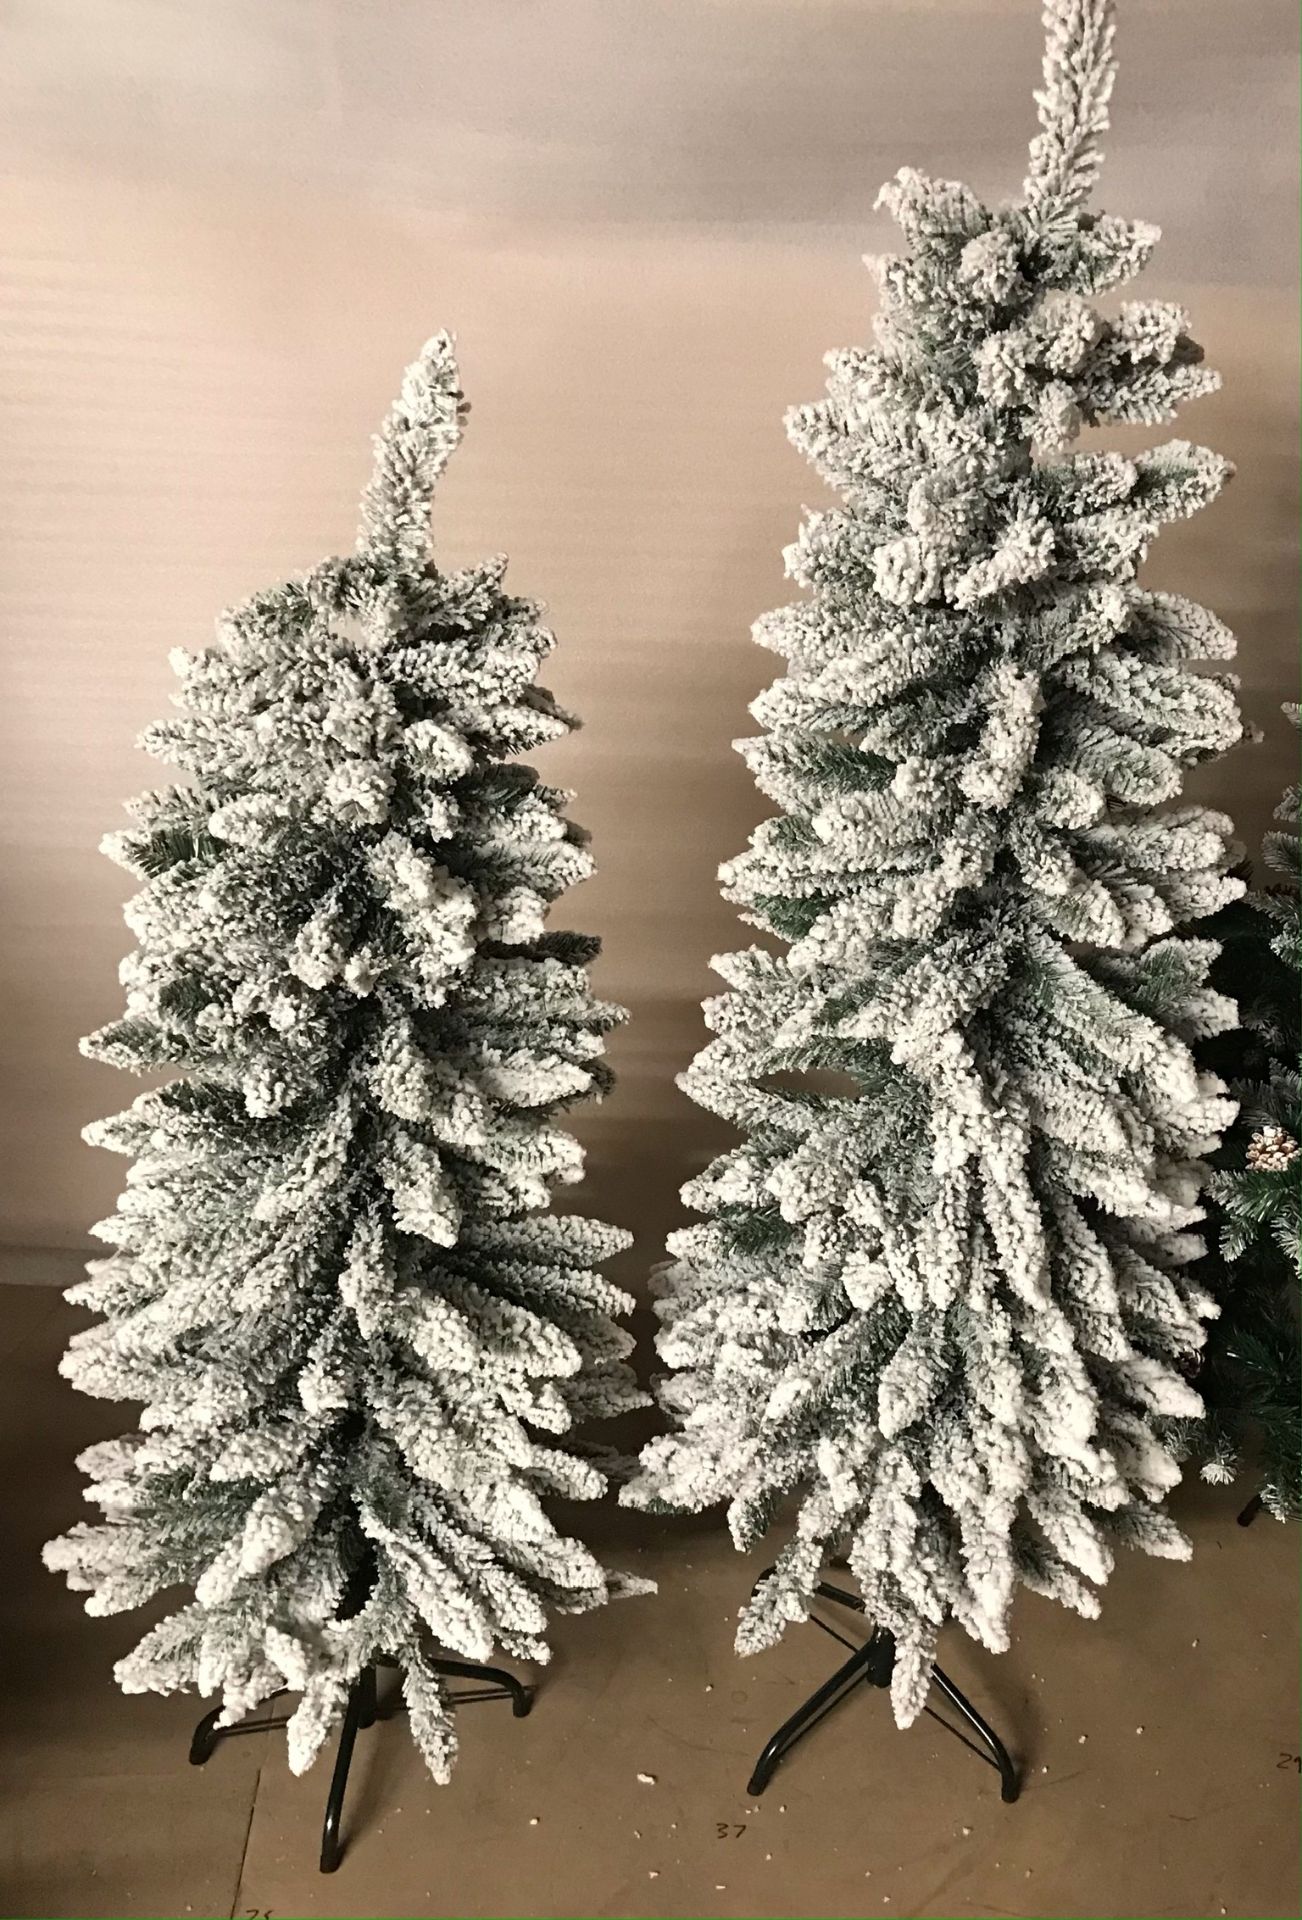 8 x 4ft Christmas Tree Artificial with Snow Frosted Tips Slim Pencil Shape - Image 2 of 2